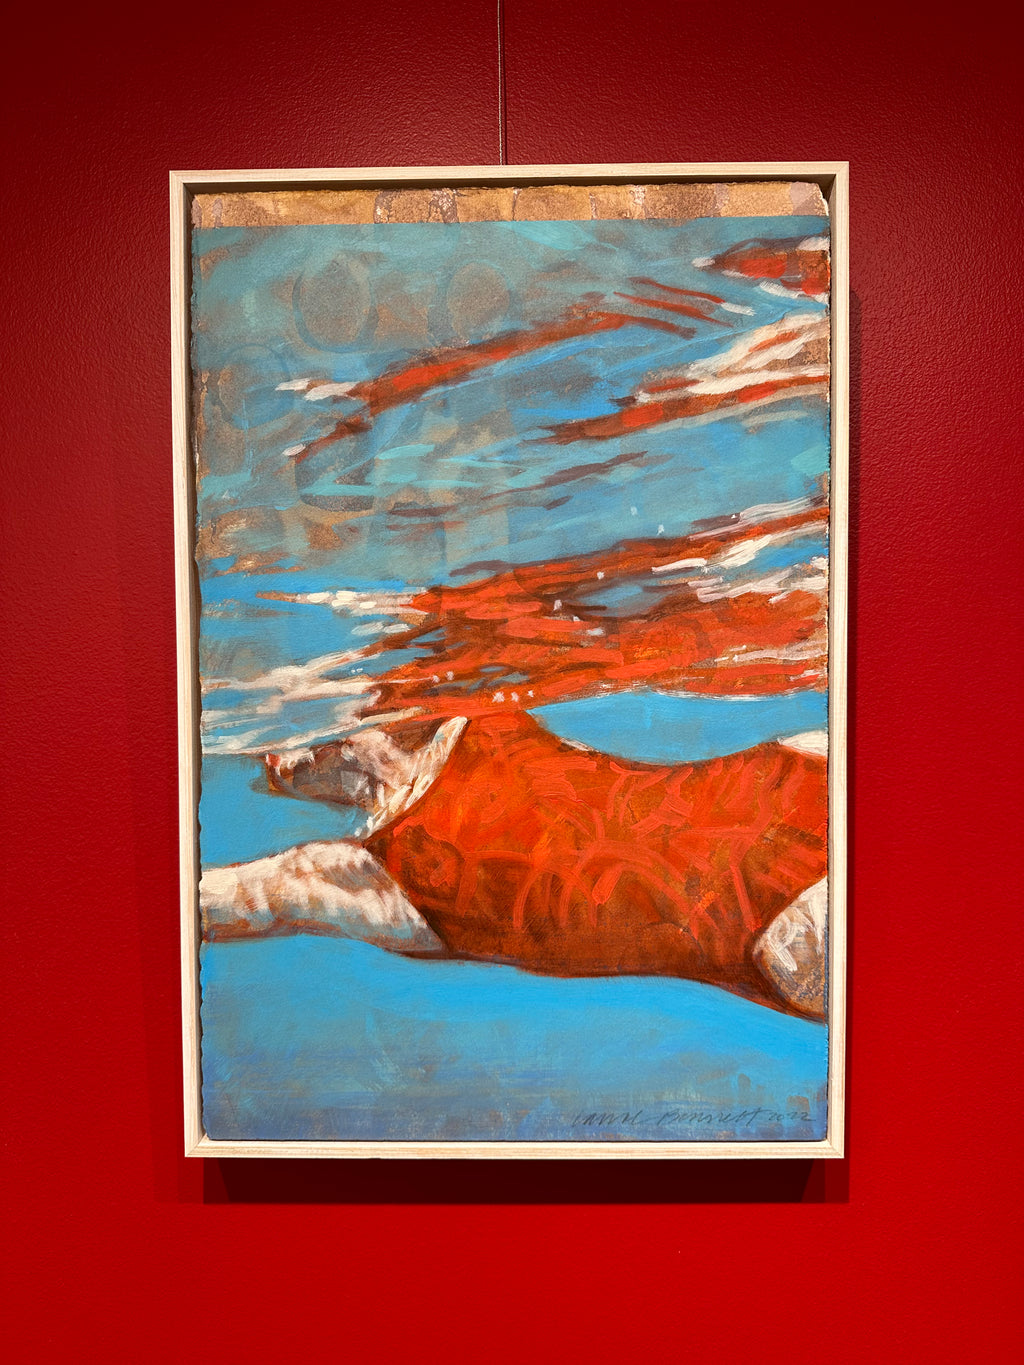 abstract contemporary oil painting of a woman in red suit swimming in turquoise water